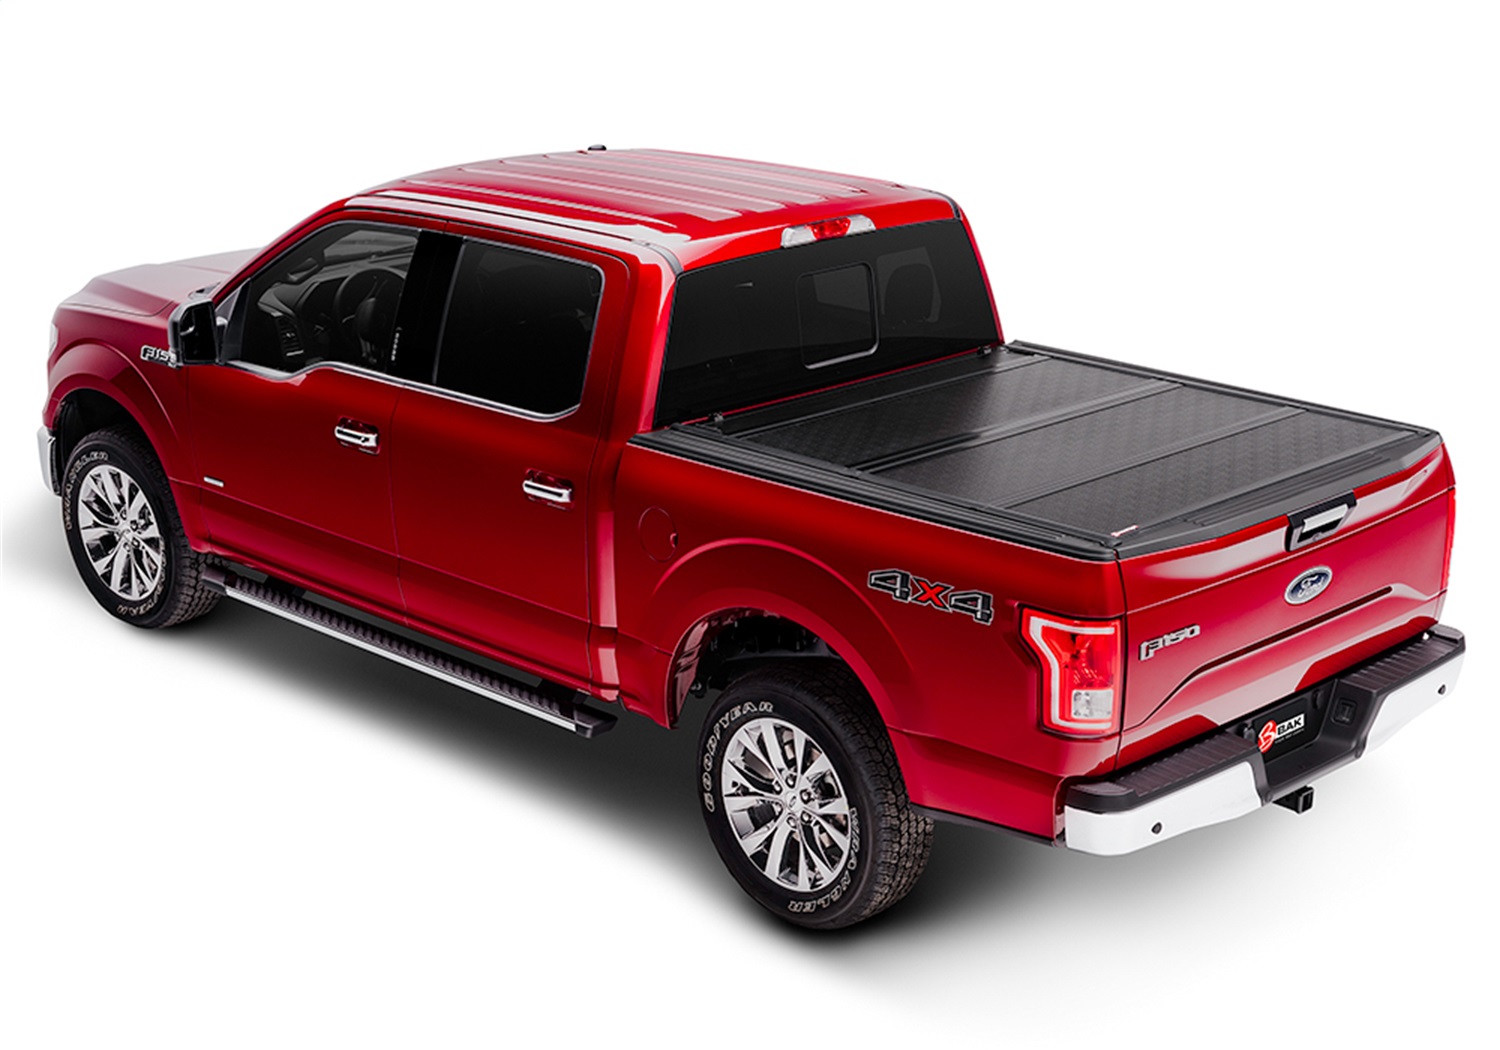 04-14 F150 STD/EXT/CREW CAB W/O TRACK SYSTEM 6FT 6IN BAKFLIP G2 TONNEAU COVER